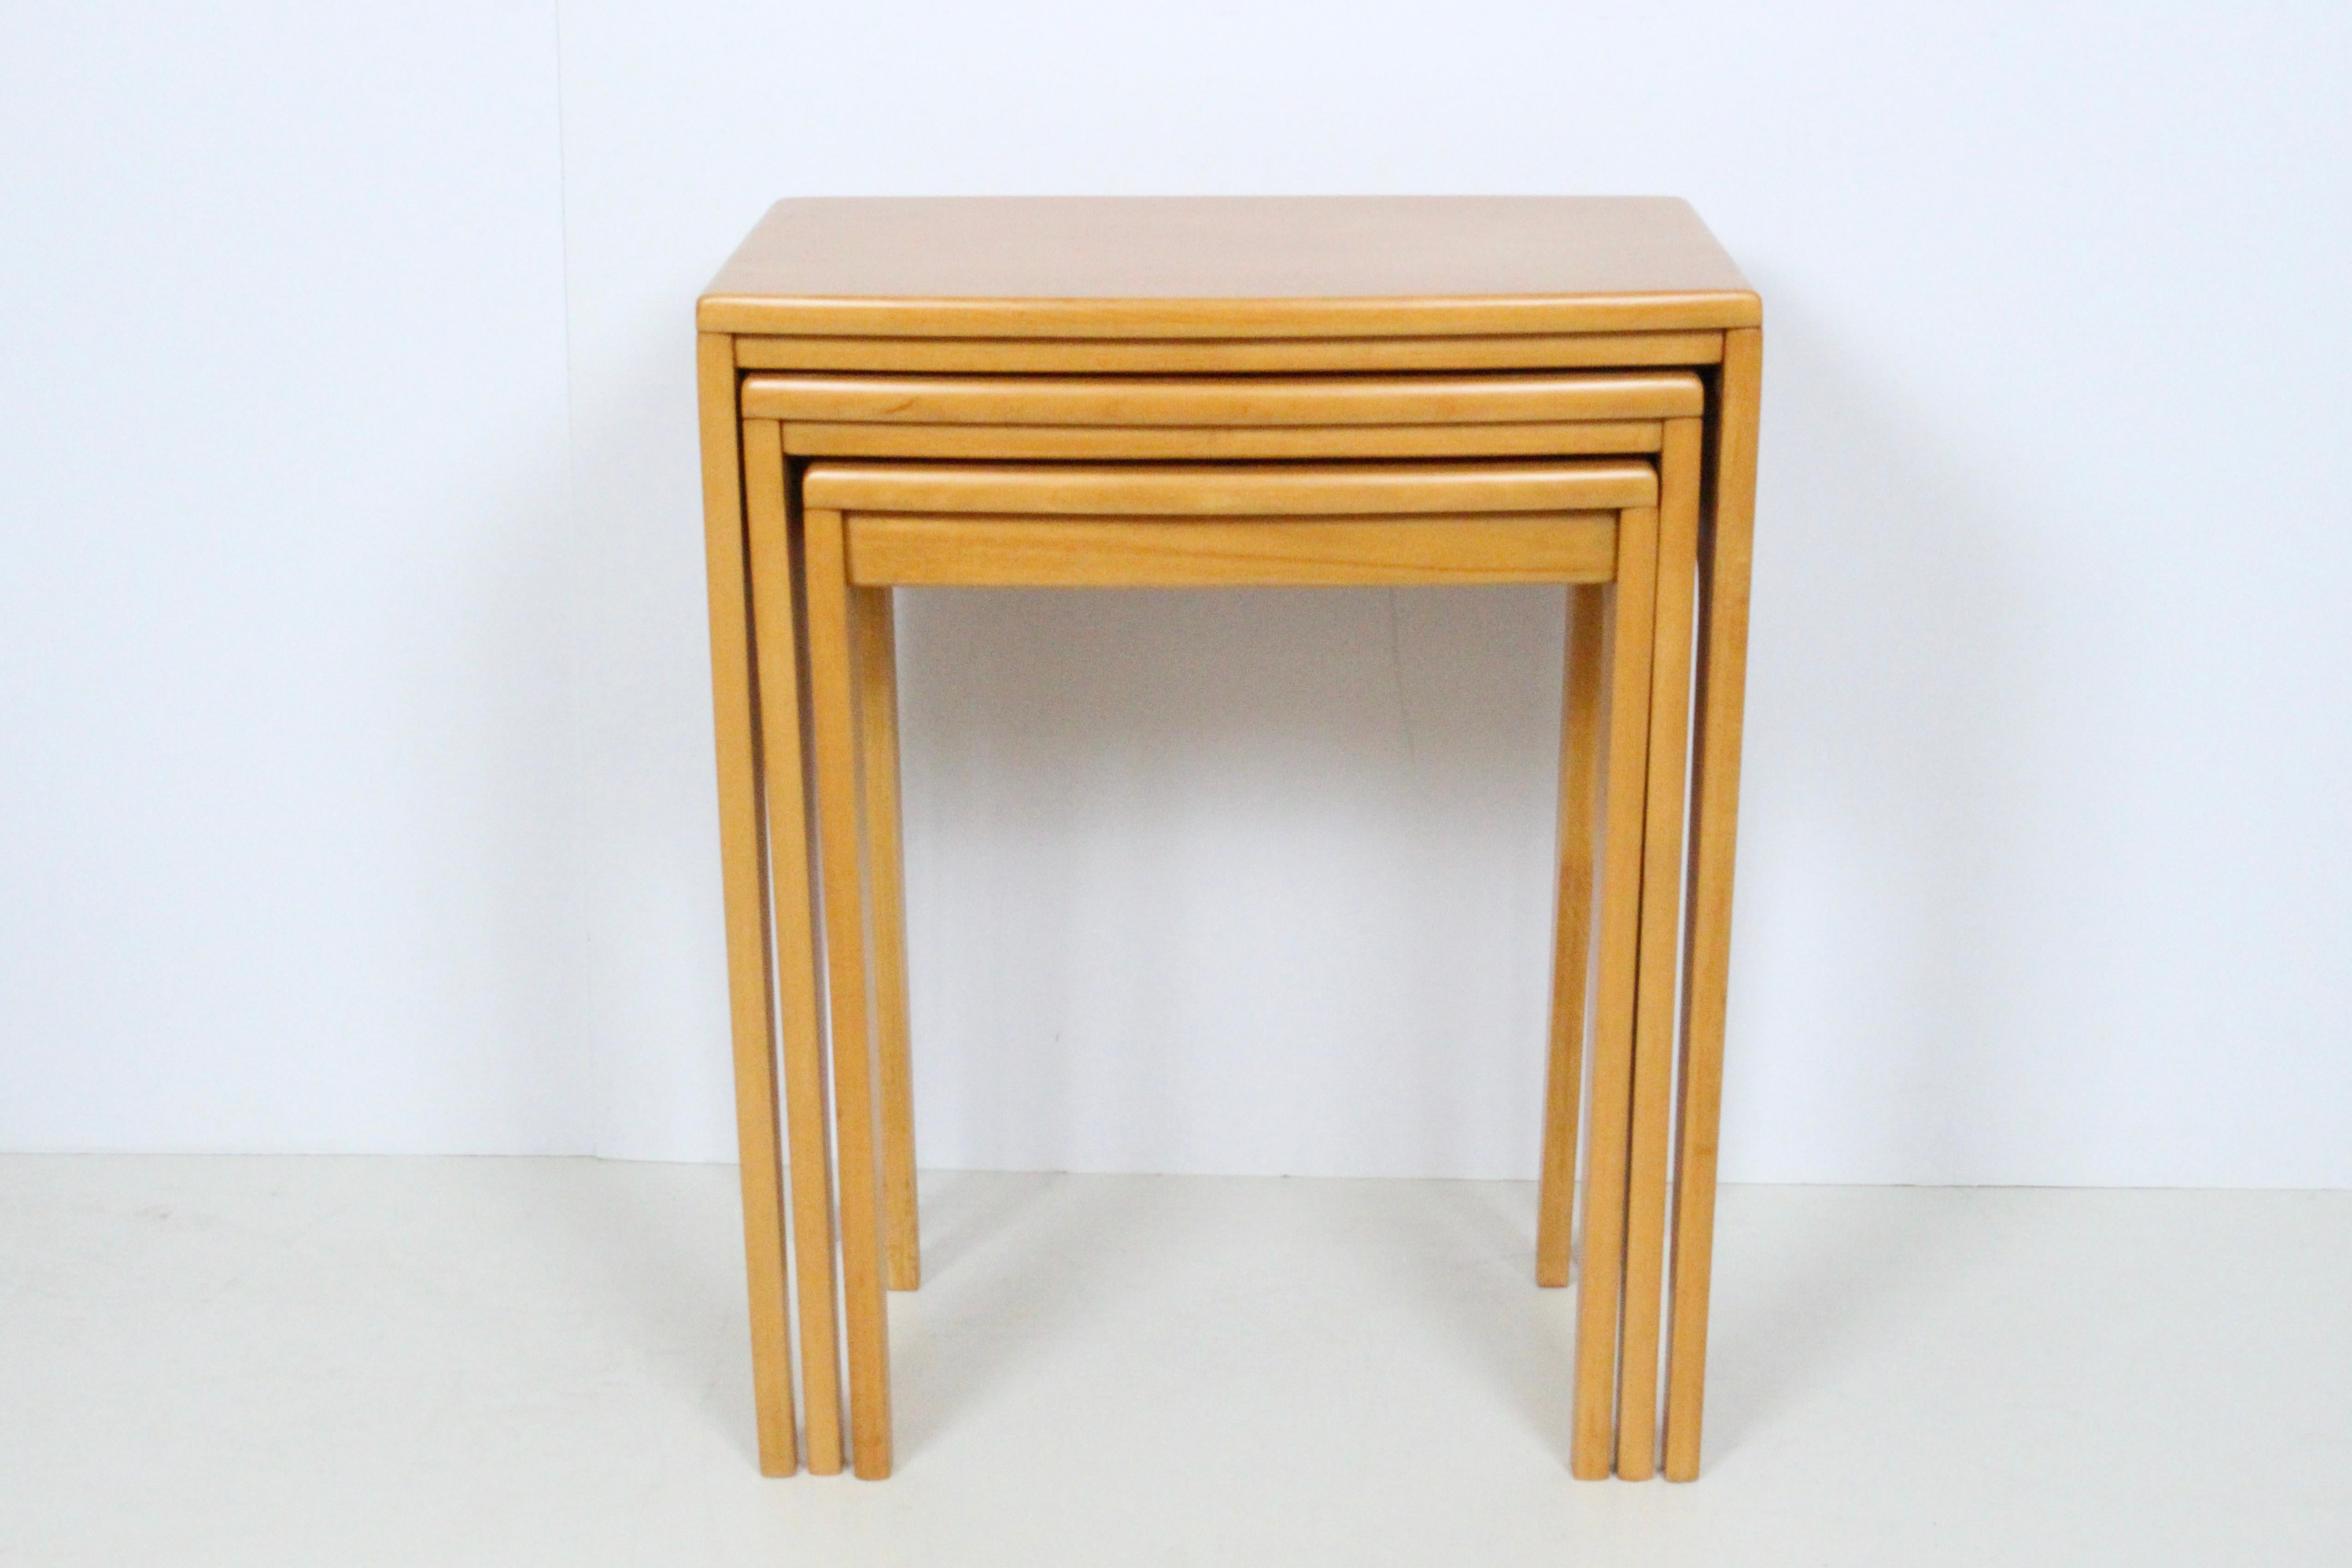 Set of three solid maple nesting tables in the style of Heywood Wakefield. Featuring a neutral, narrow rectangular form, smooth rounded face small footprint overall. Versatile. Compact. Sturdy. Measurements: Outside (25.75H x 21Wx 14D) Middle (24H x